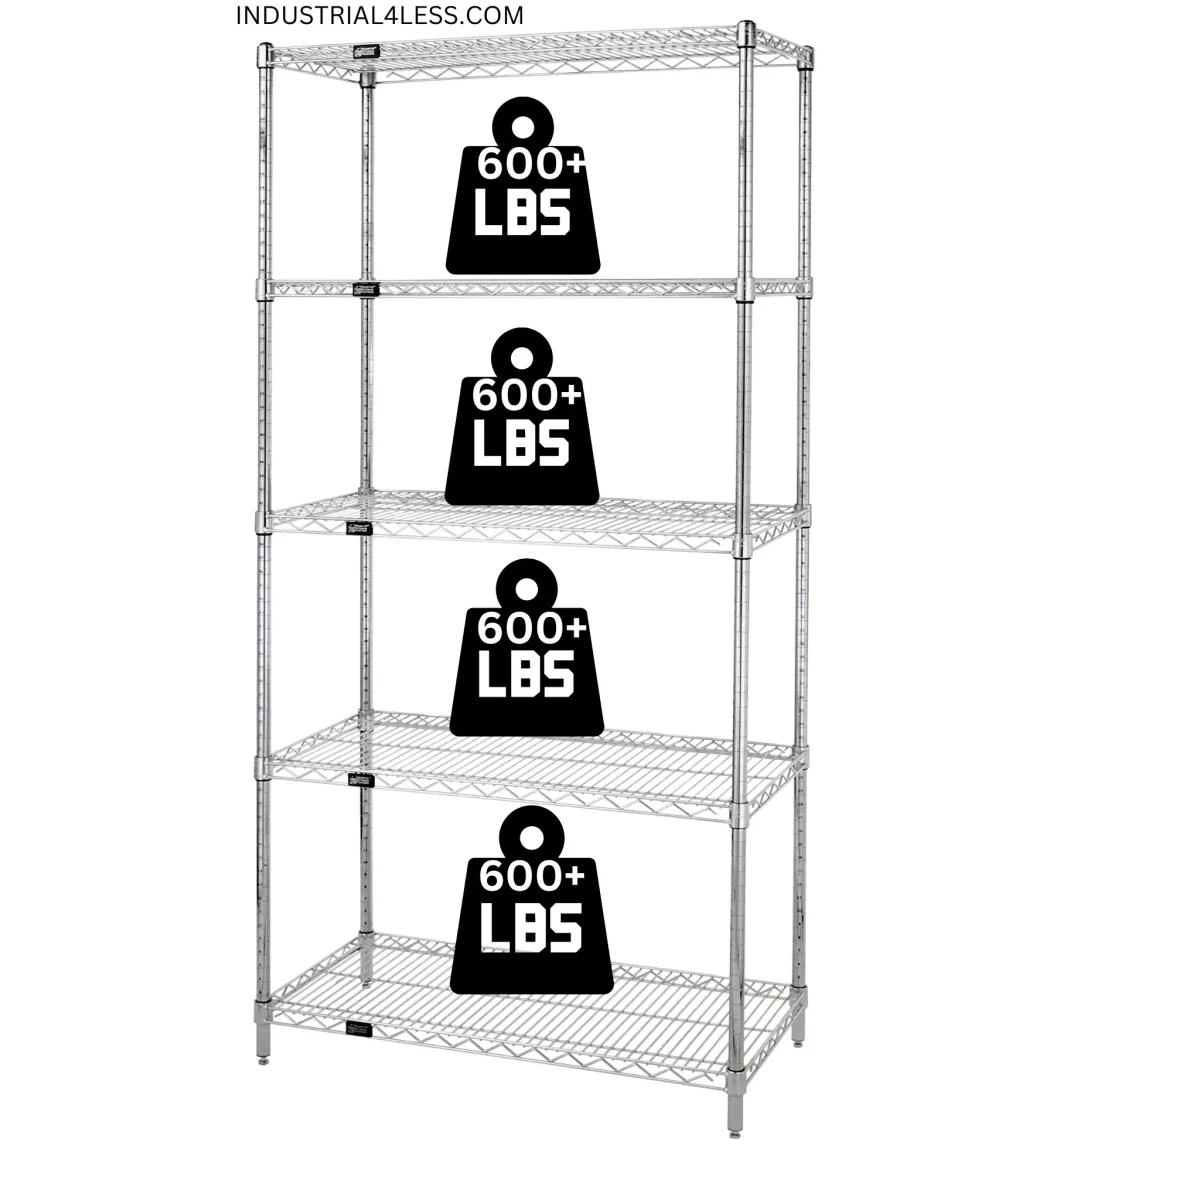 24" x 54" Stainless Steel Wire Shelving Unit - Industrial 4 Less - 24545S-5